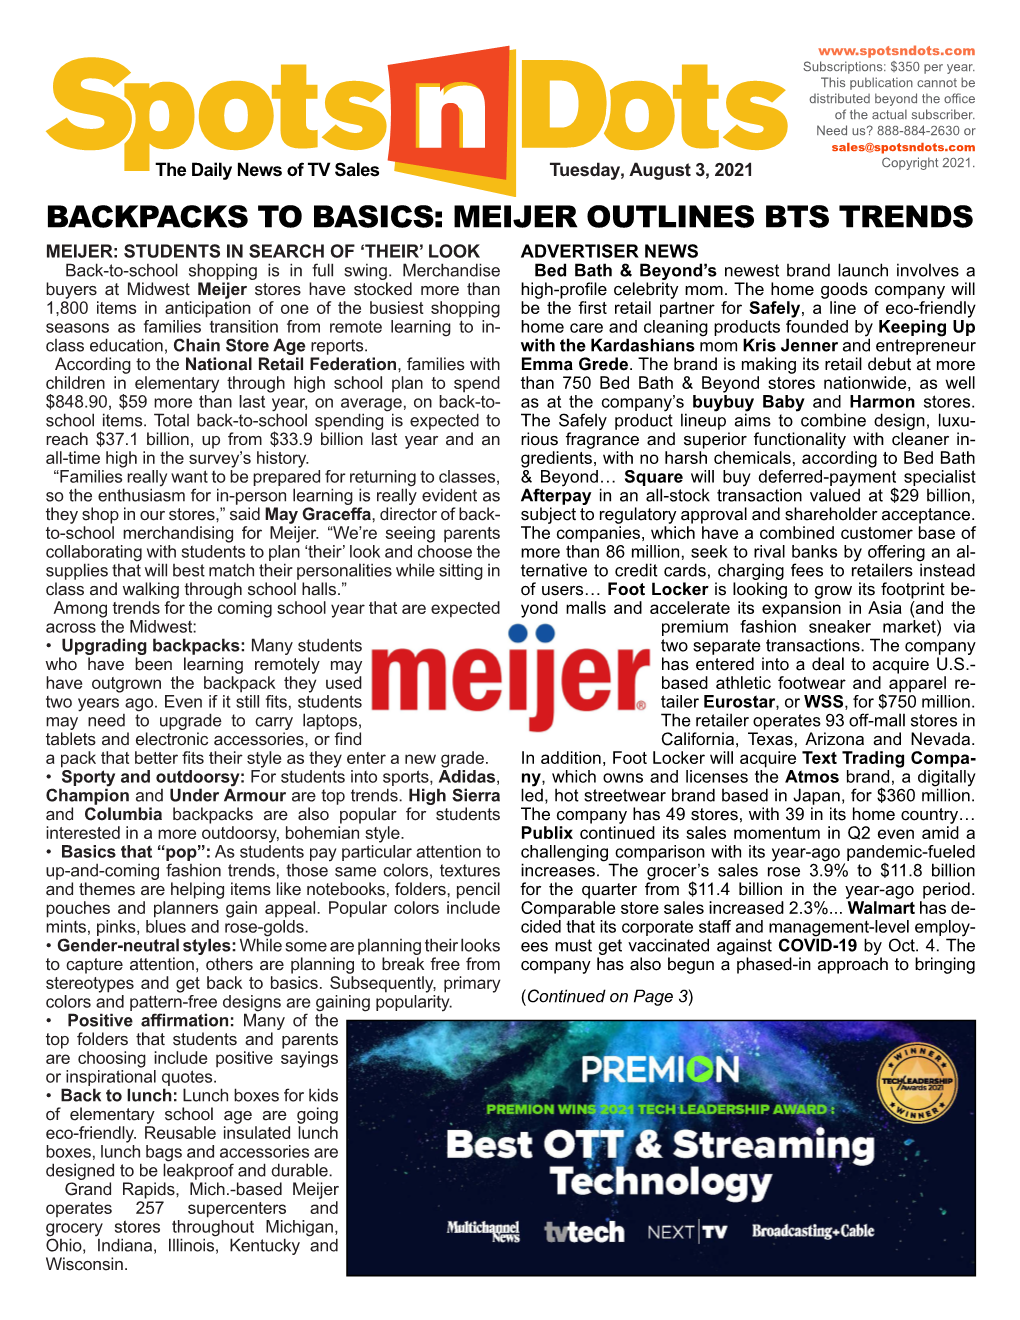 BACKPACKS to BASICS: MEIJER OUTLINES BTS TRENDS MEIJER: STUDENTS in SEARCH of ‘THEIR’ LOOK ADVERTISER NEWS Back-To-School Shopping Is in Full Swing